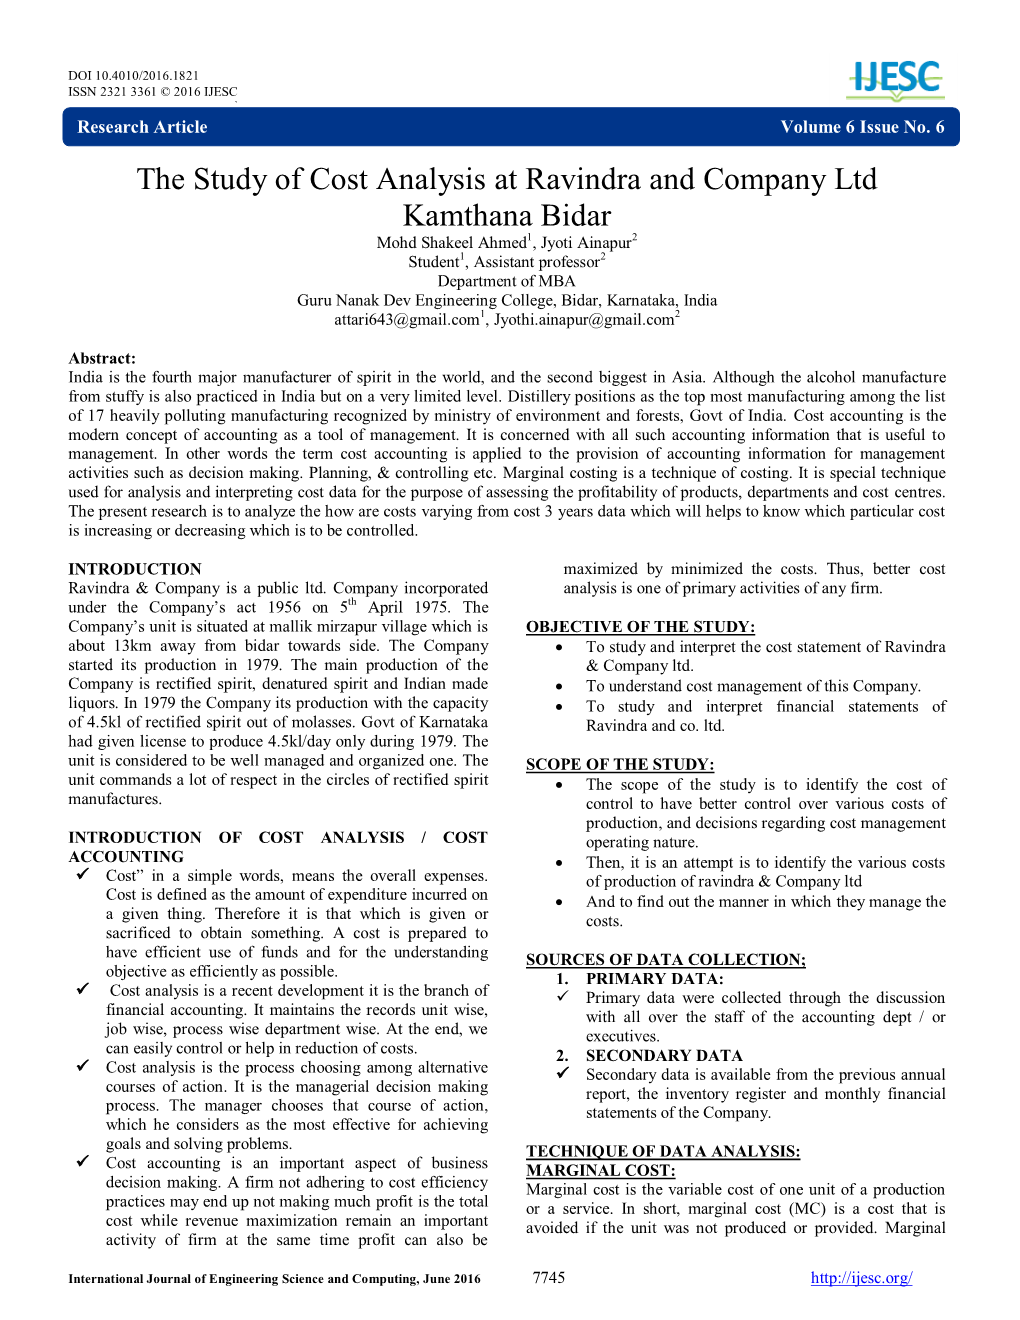 The Study of Cost Analysis at Ravindra and Company Ltd